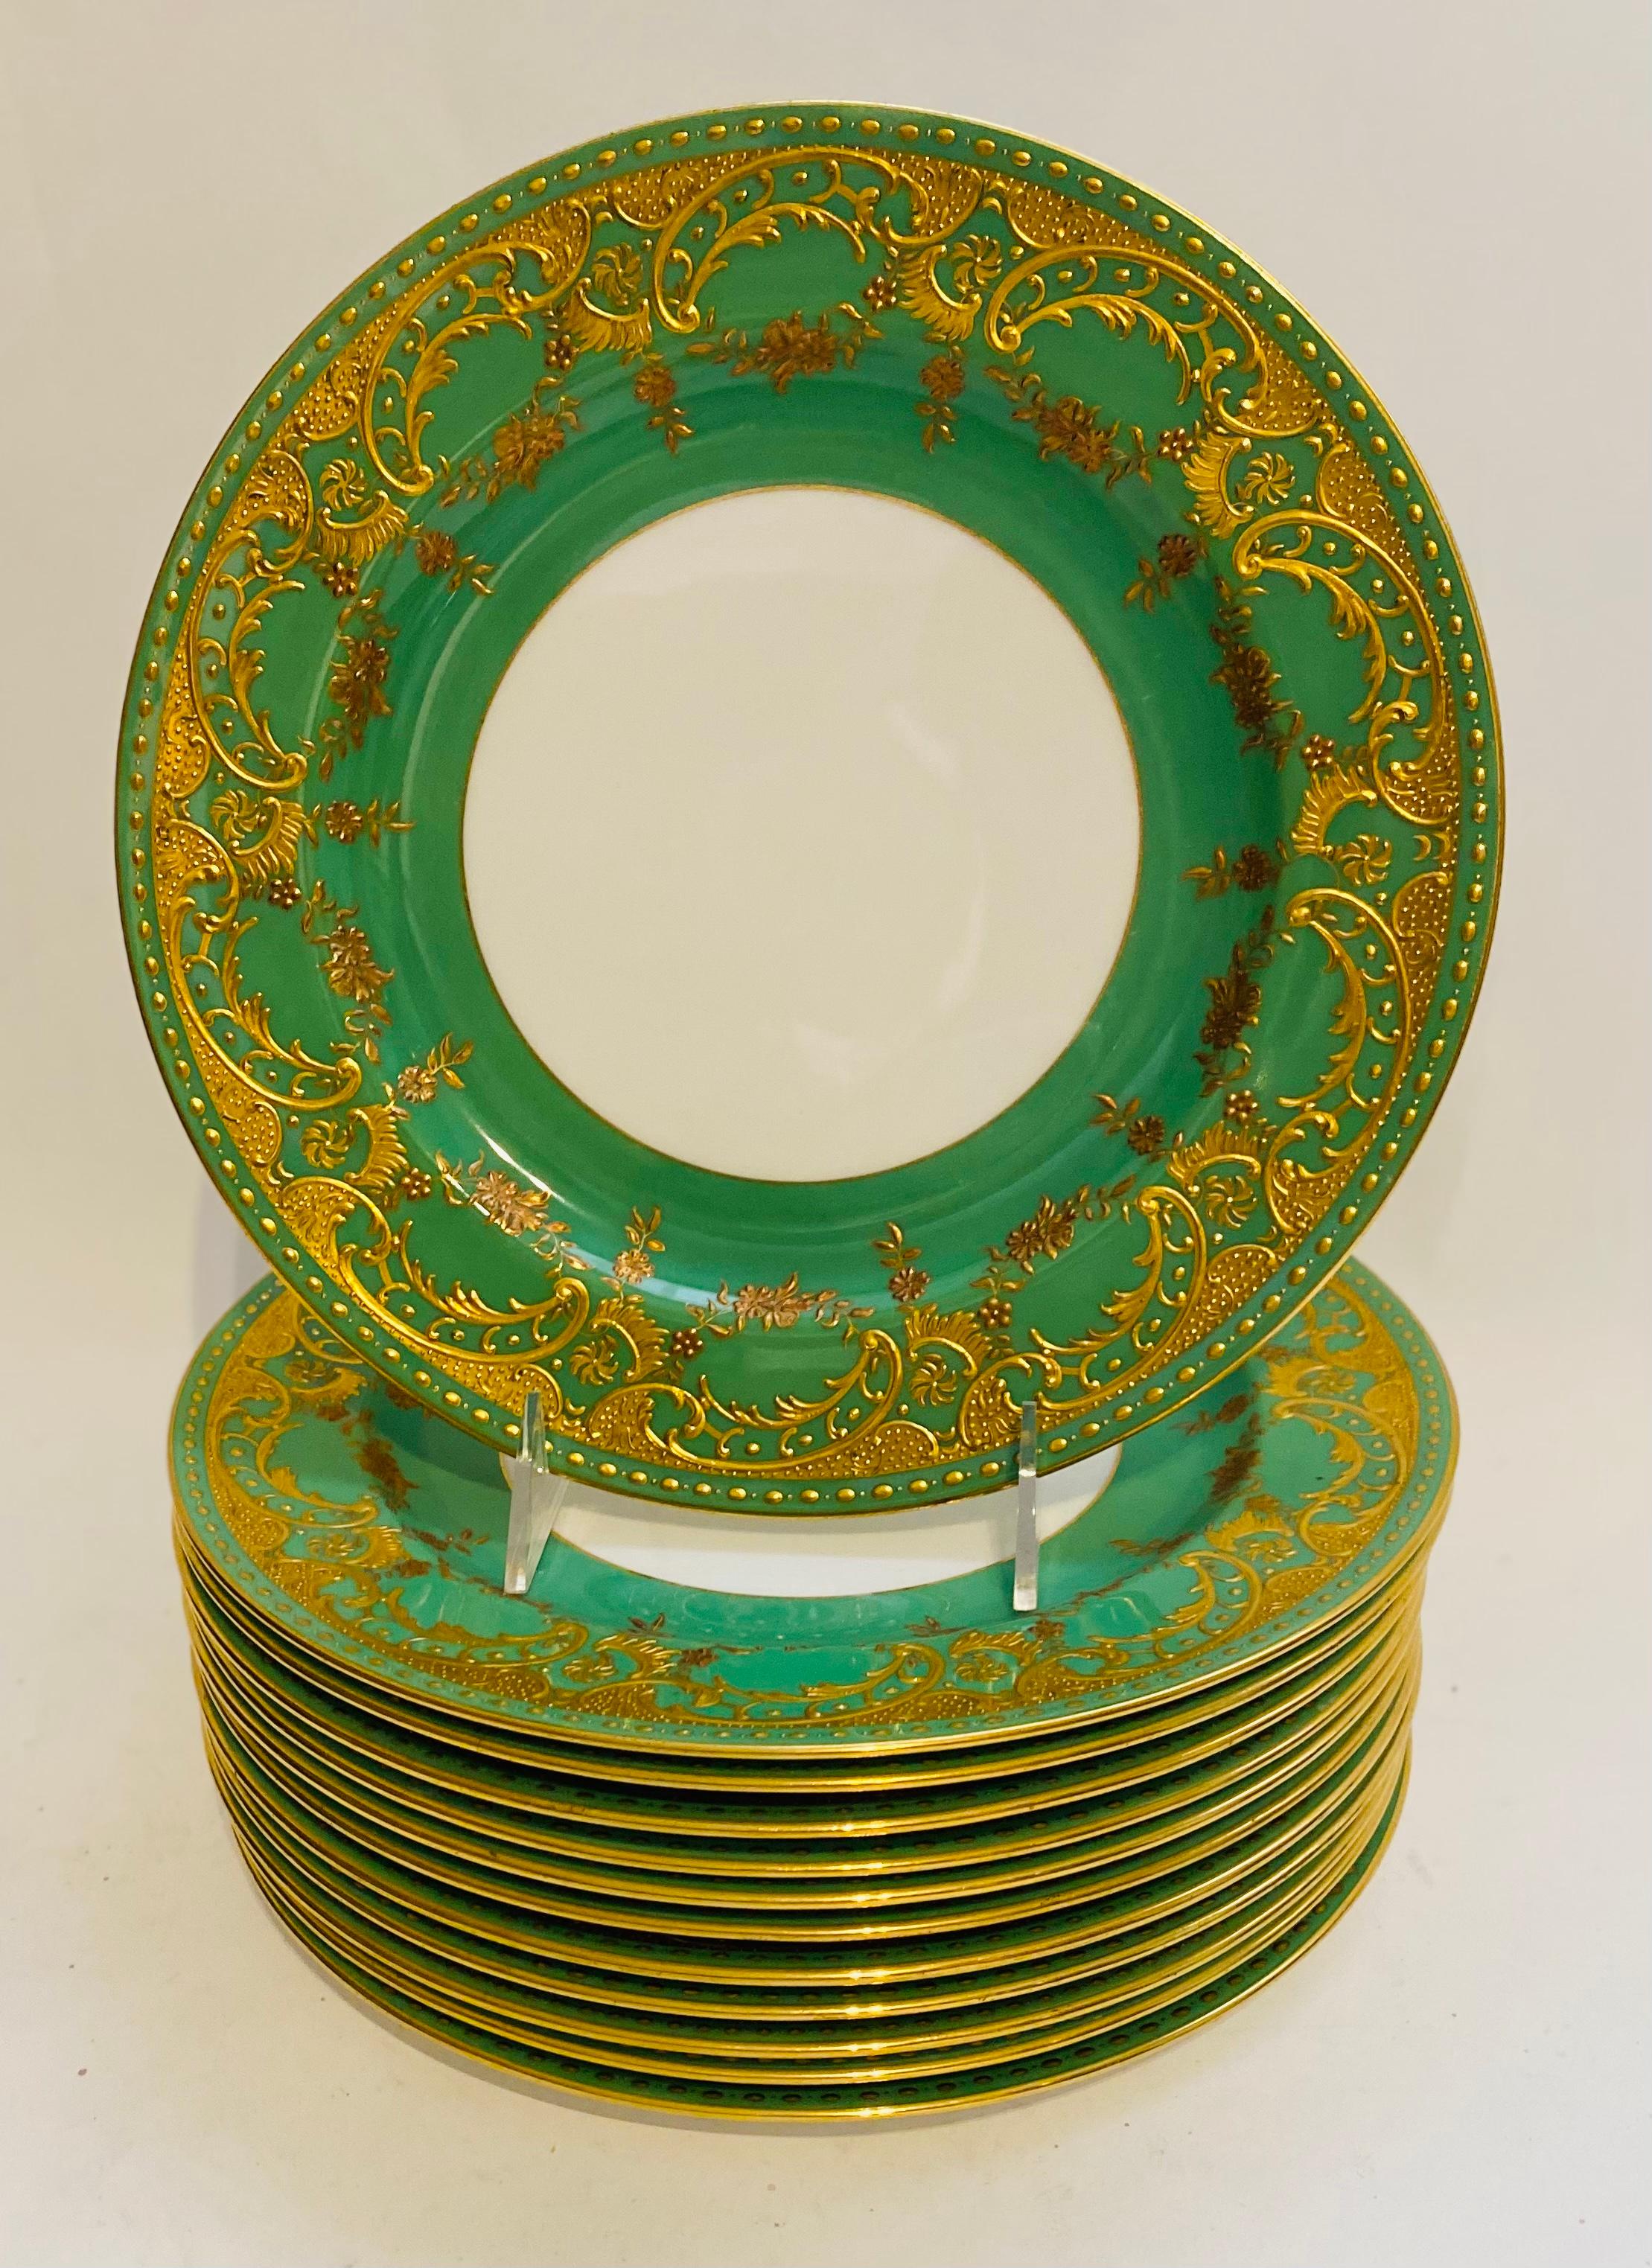 Neoclassical 12 Heavily Gilt Encrusted Antique Green & Gold Minton England Dinner Plates For Sale